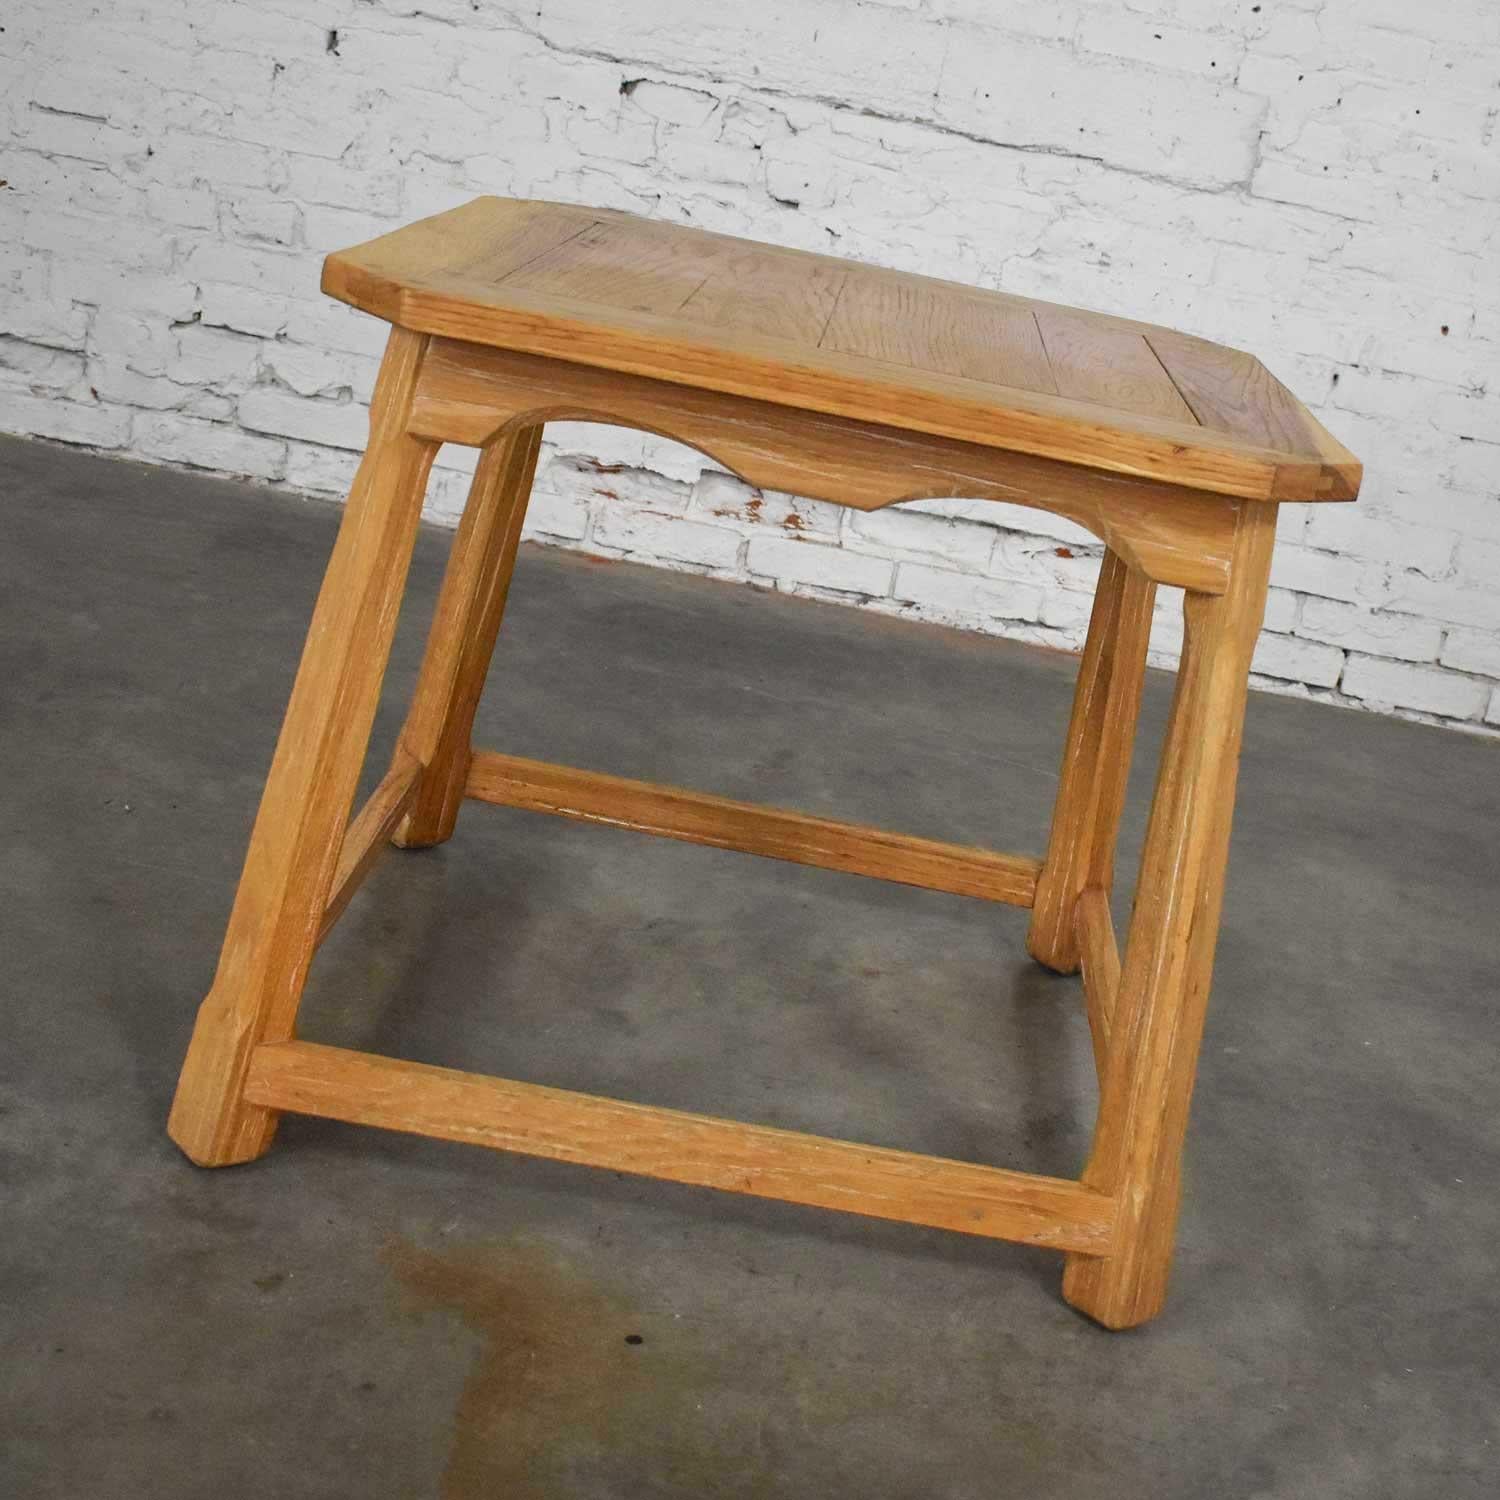 American Larger Ranch Oak Lamp Table End Table Natural Oak Finish by A. Brandt Company